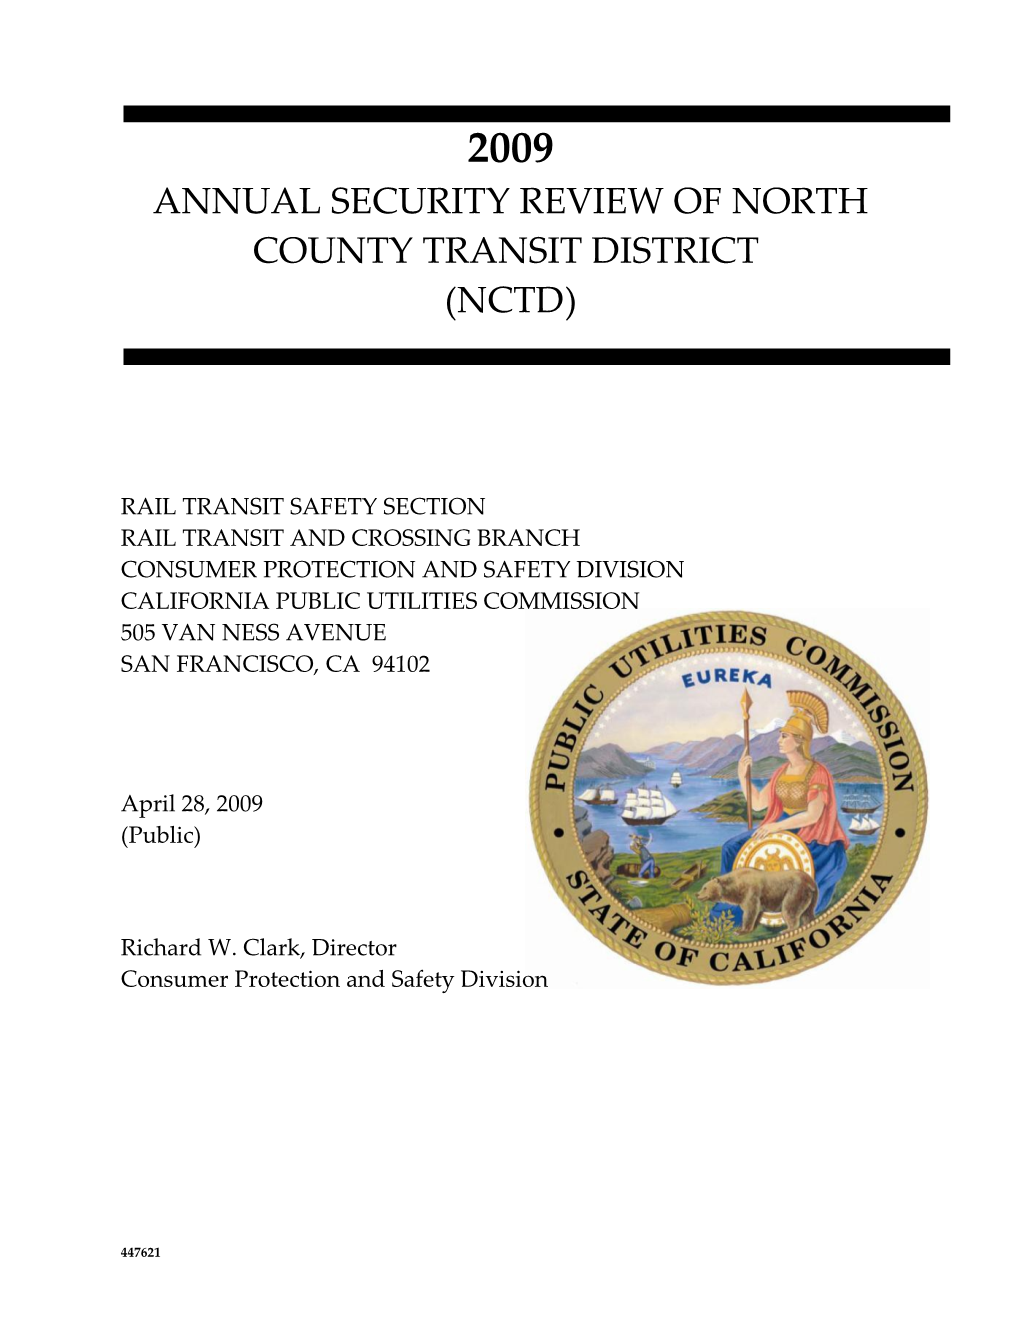 Annual Security Review of North County Transit District